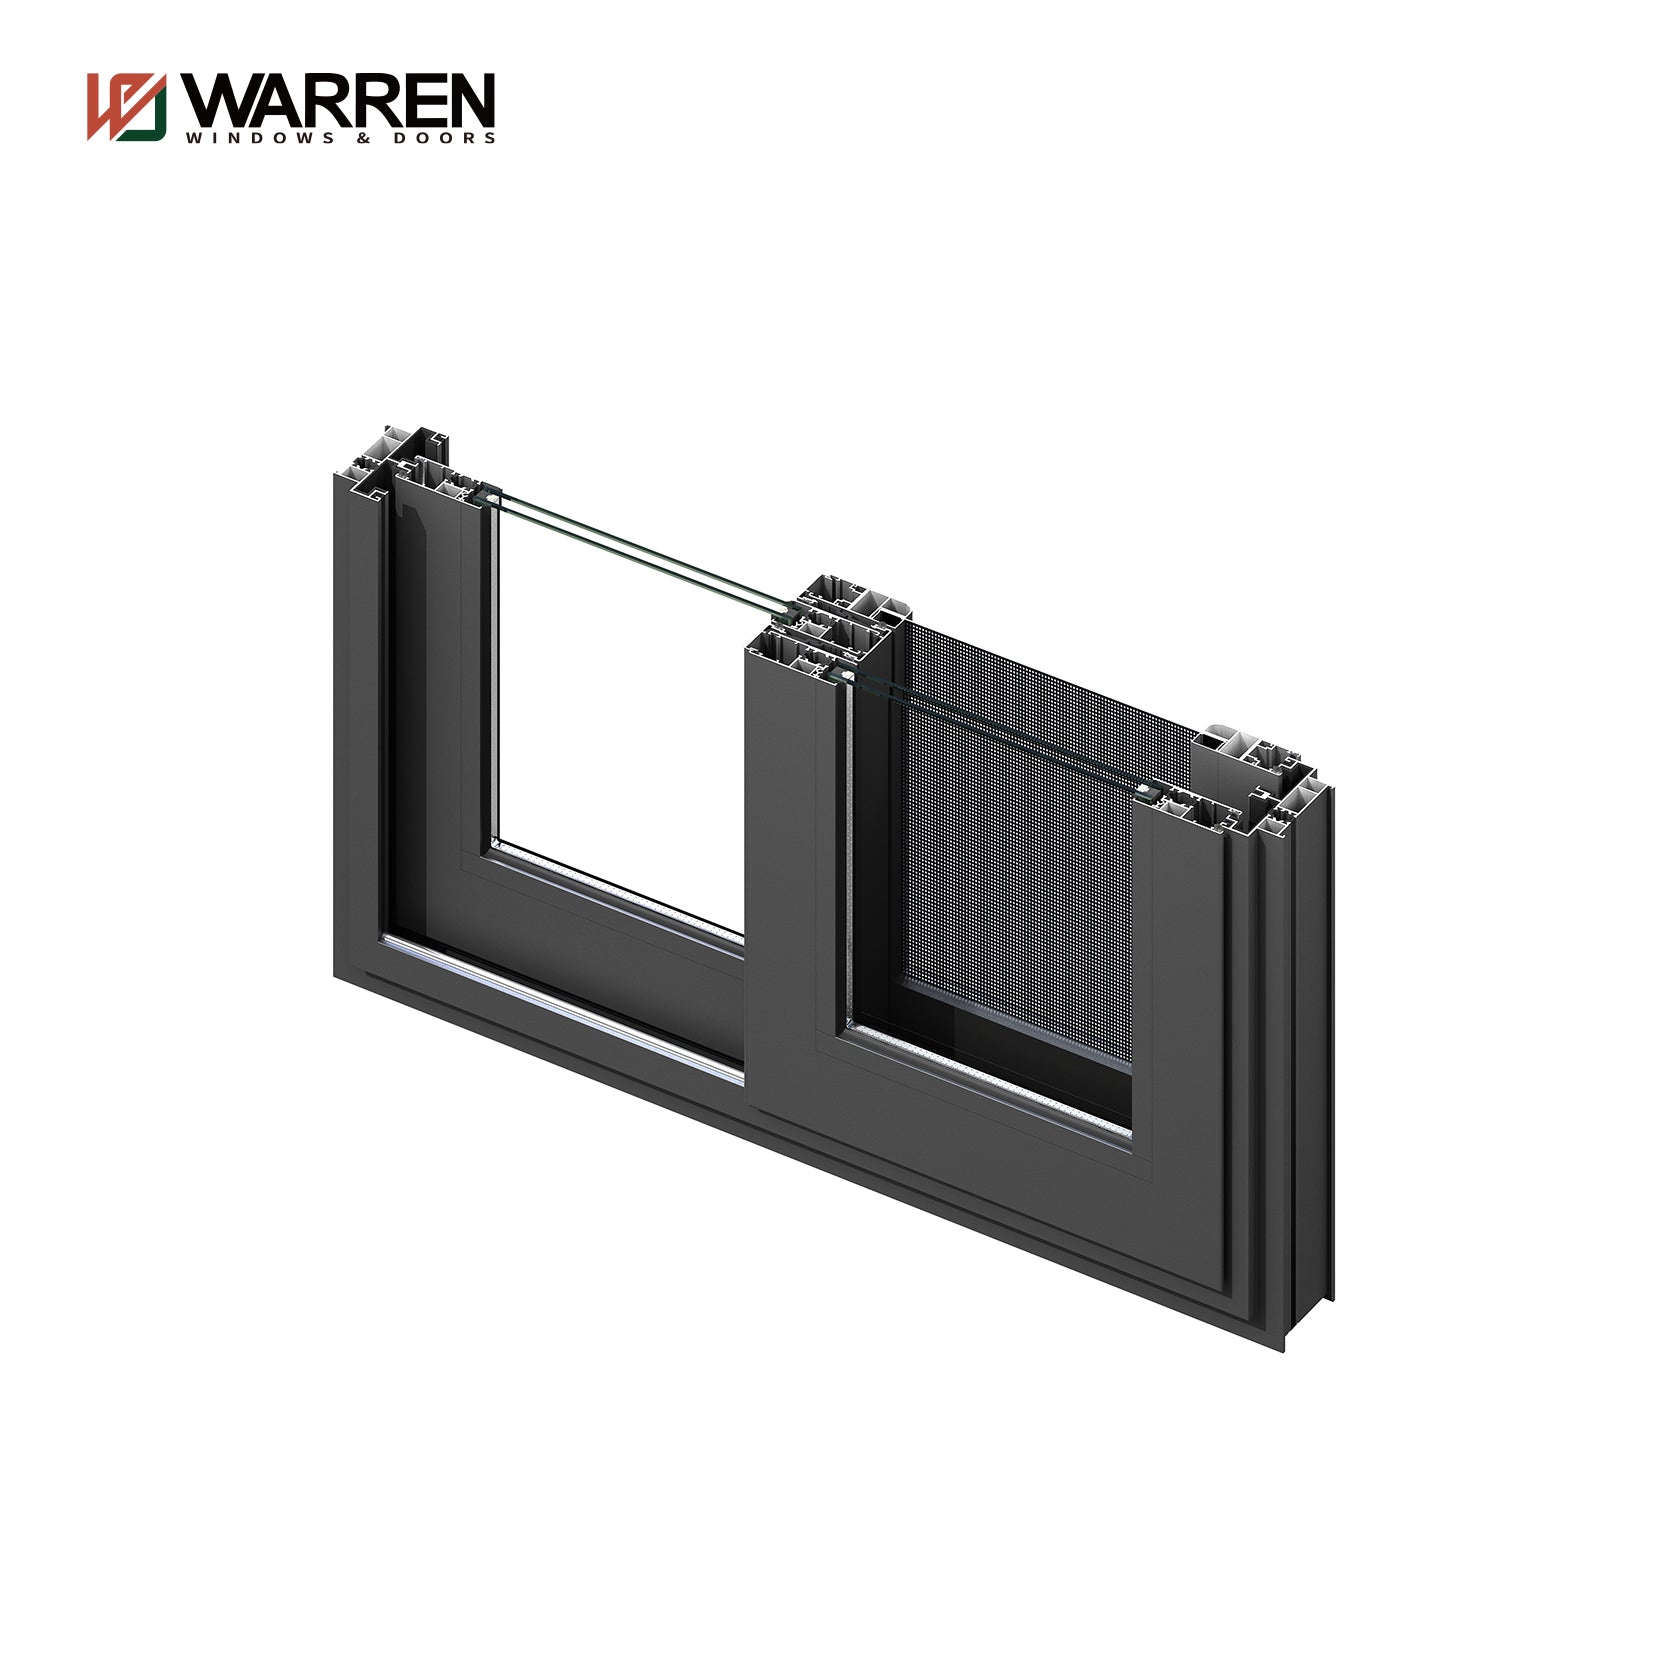 Warren 40x54 window energy efficient design aluminum frame glass windows with fully tempered glass